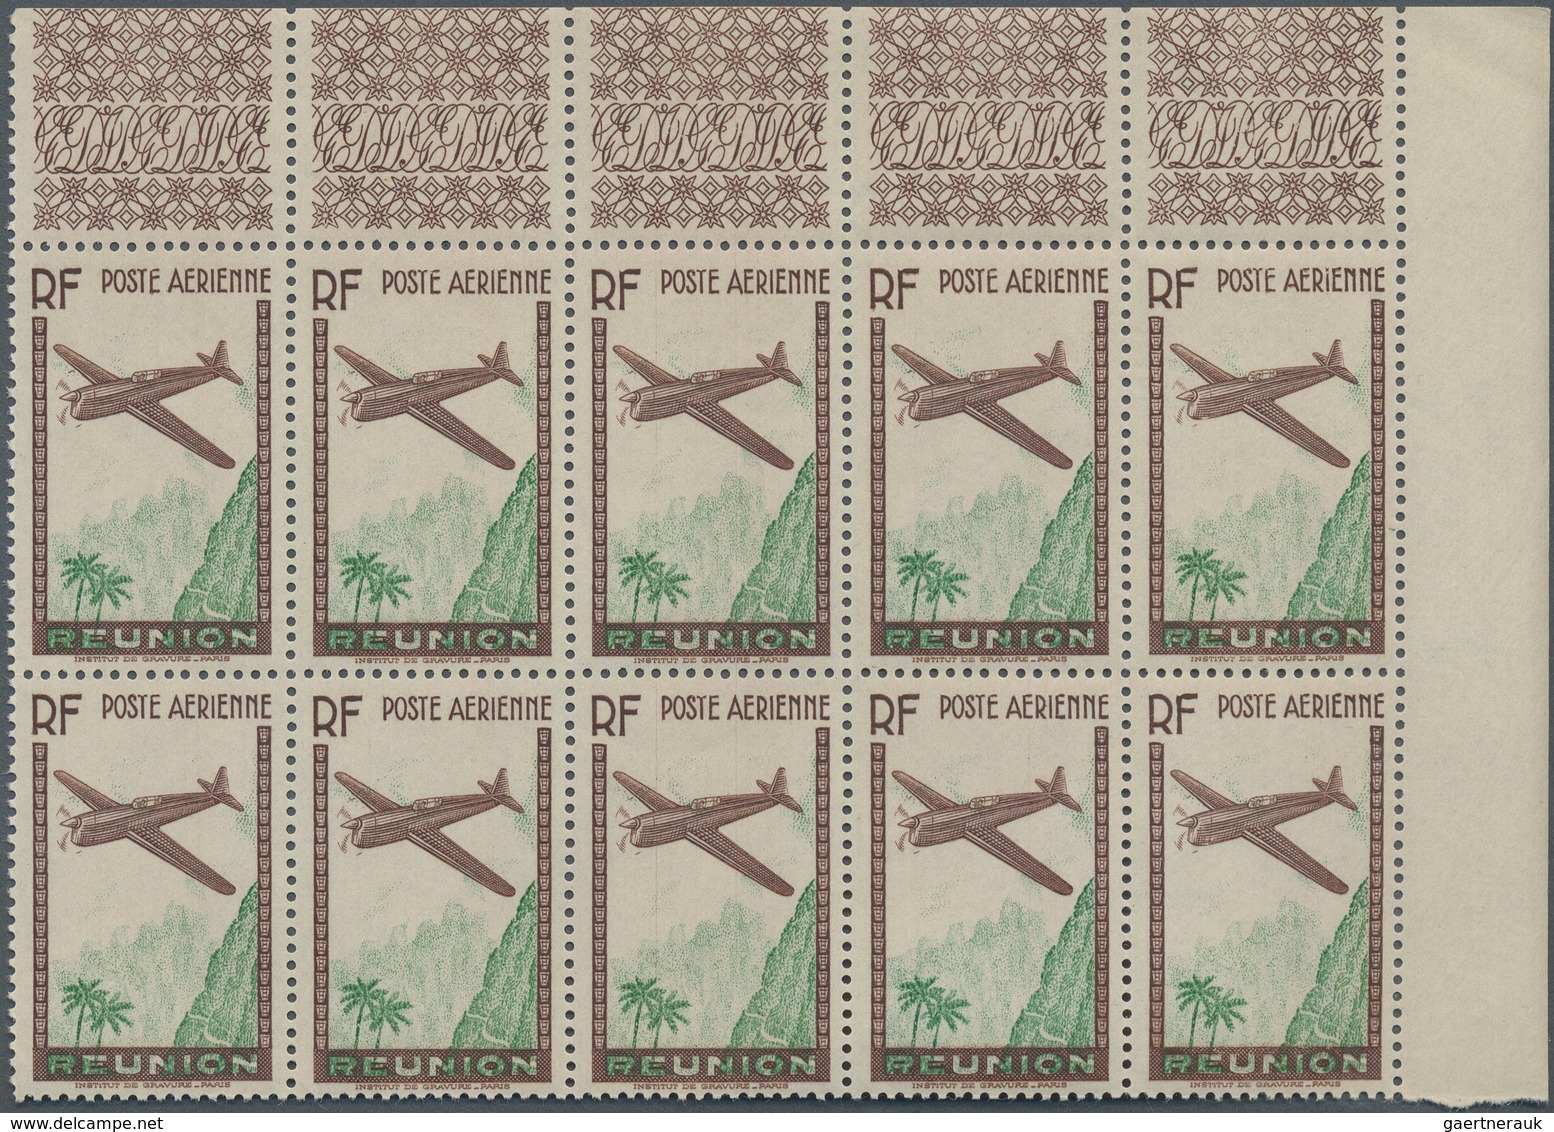 Reunion: 1938, Airmail Issue ‚airplane Over Mountains‘ (12.65fr.) Brown/green With MISSING DENOMINAT - Oblitérés